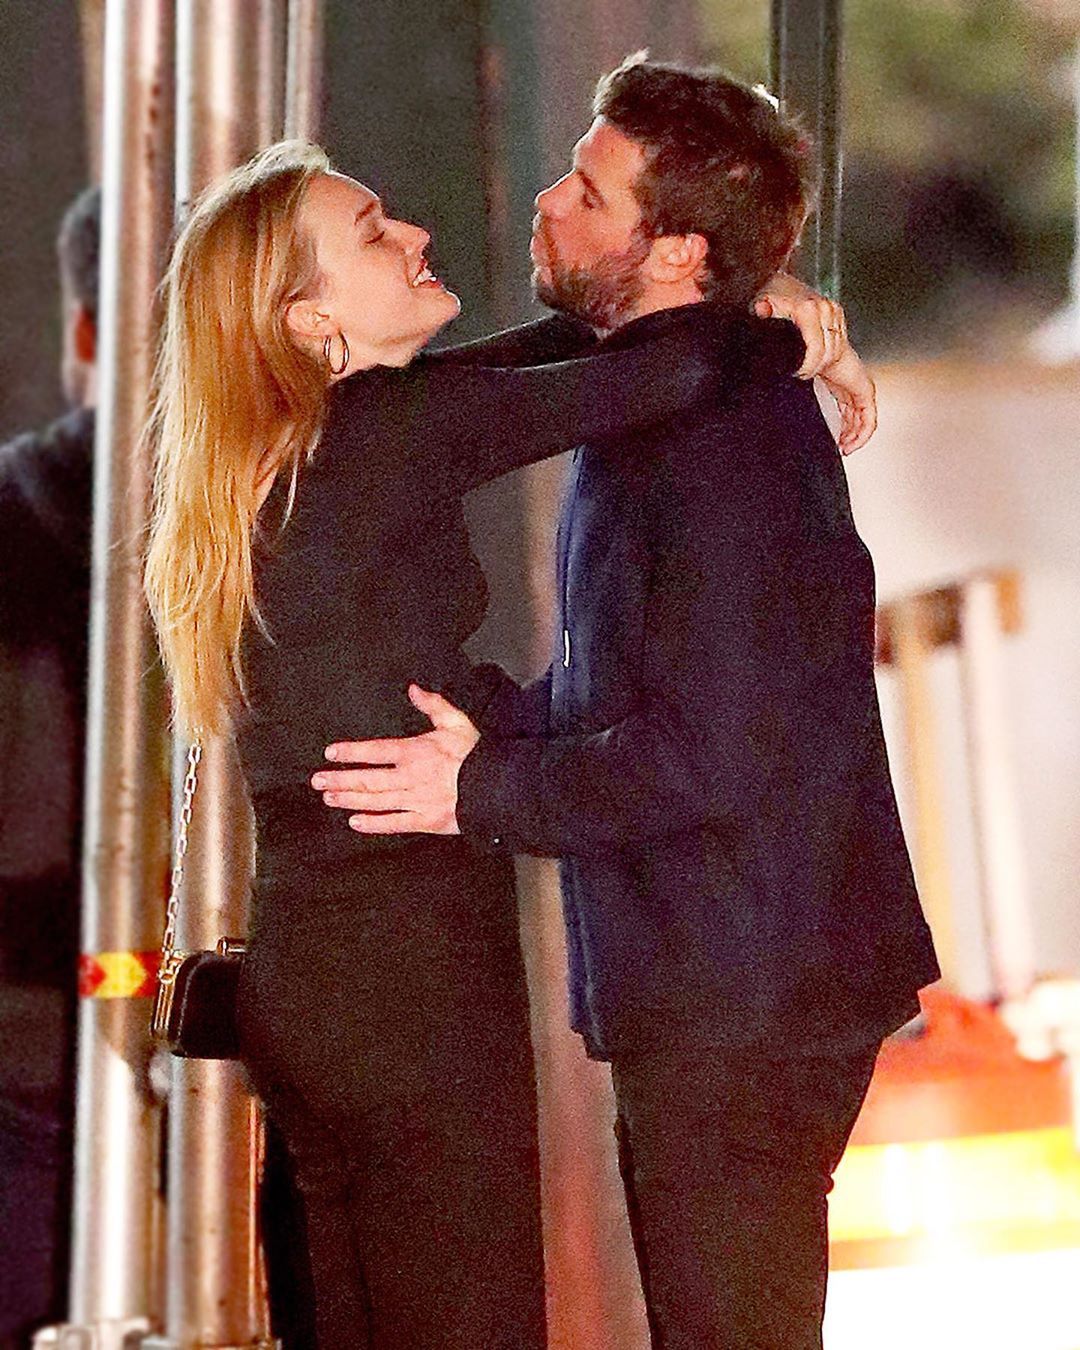 After Split With Miley Cyrus, Liam Hemsworth Gives PDA Goals With Maddison Brown In The Streets Of New York